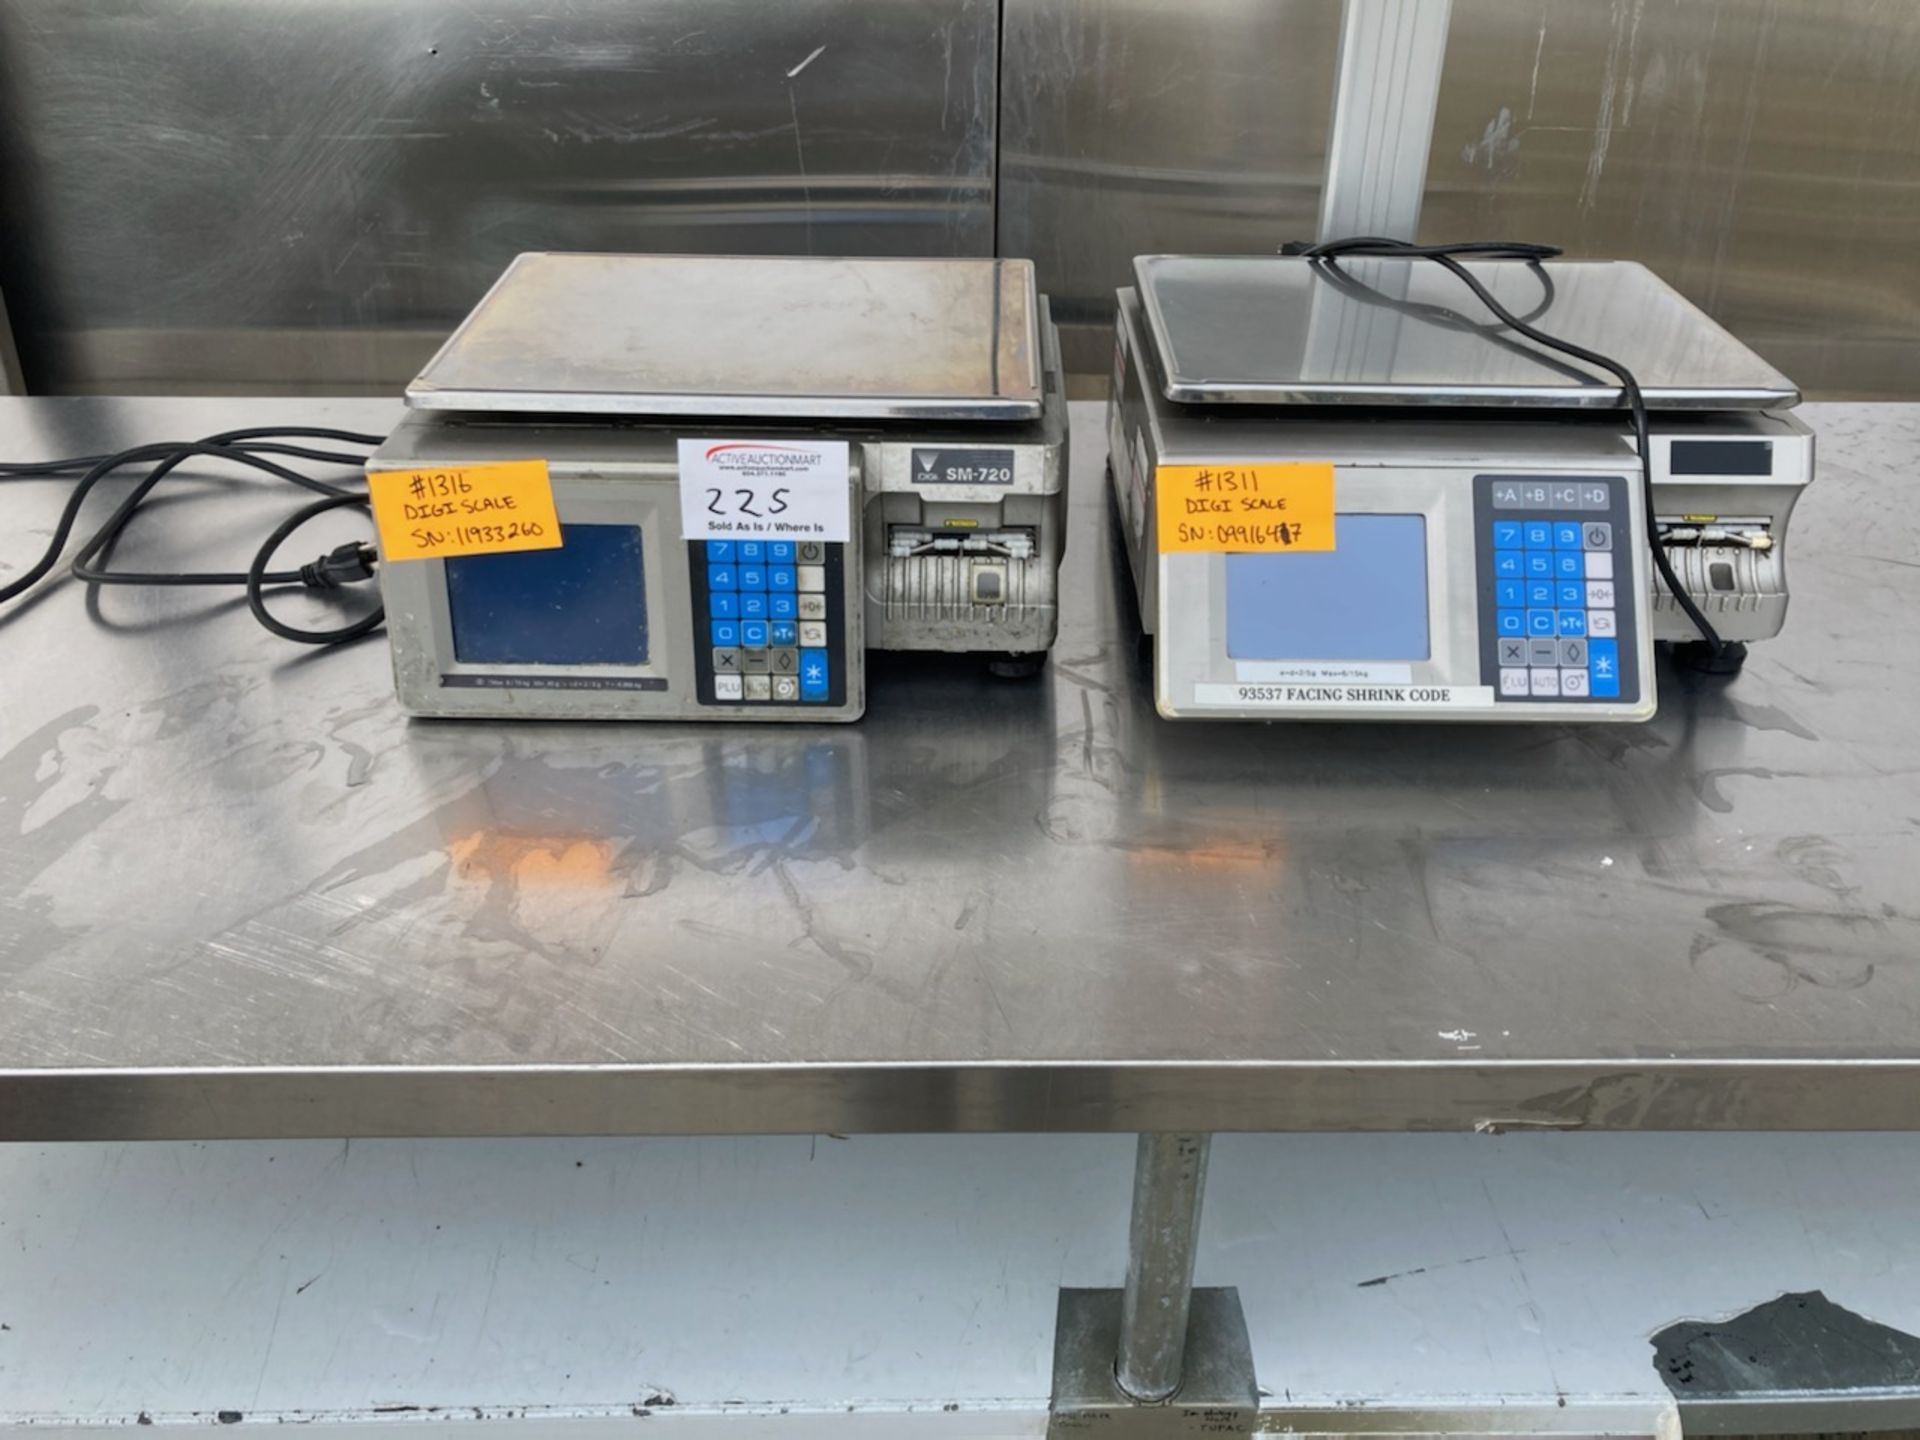 2 Digi SM 720 Scales with Printer - Price Each Times 2